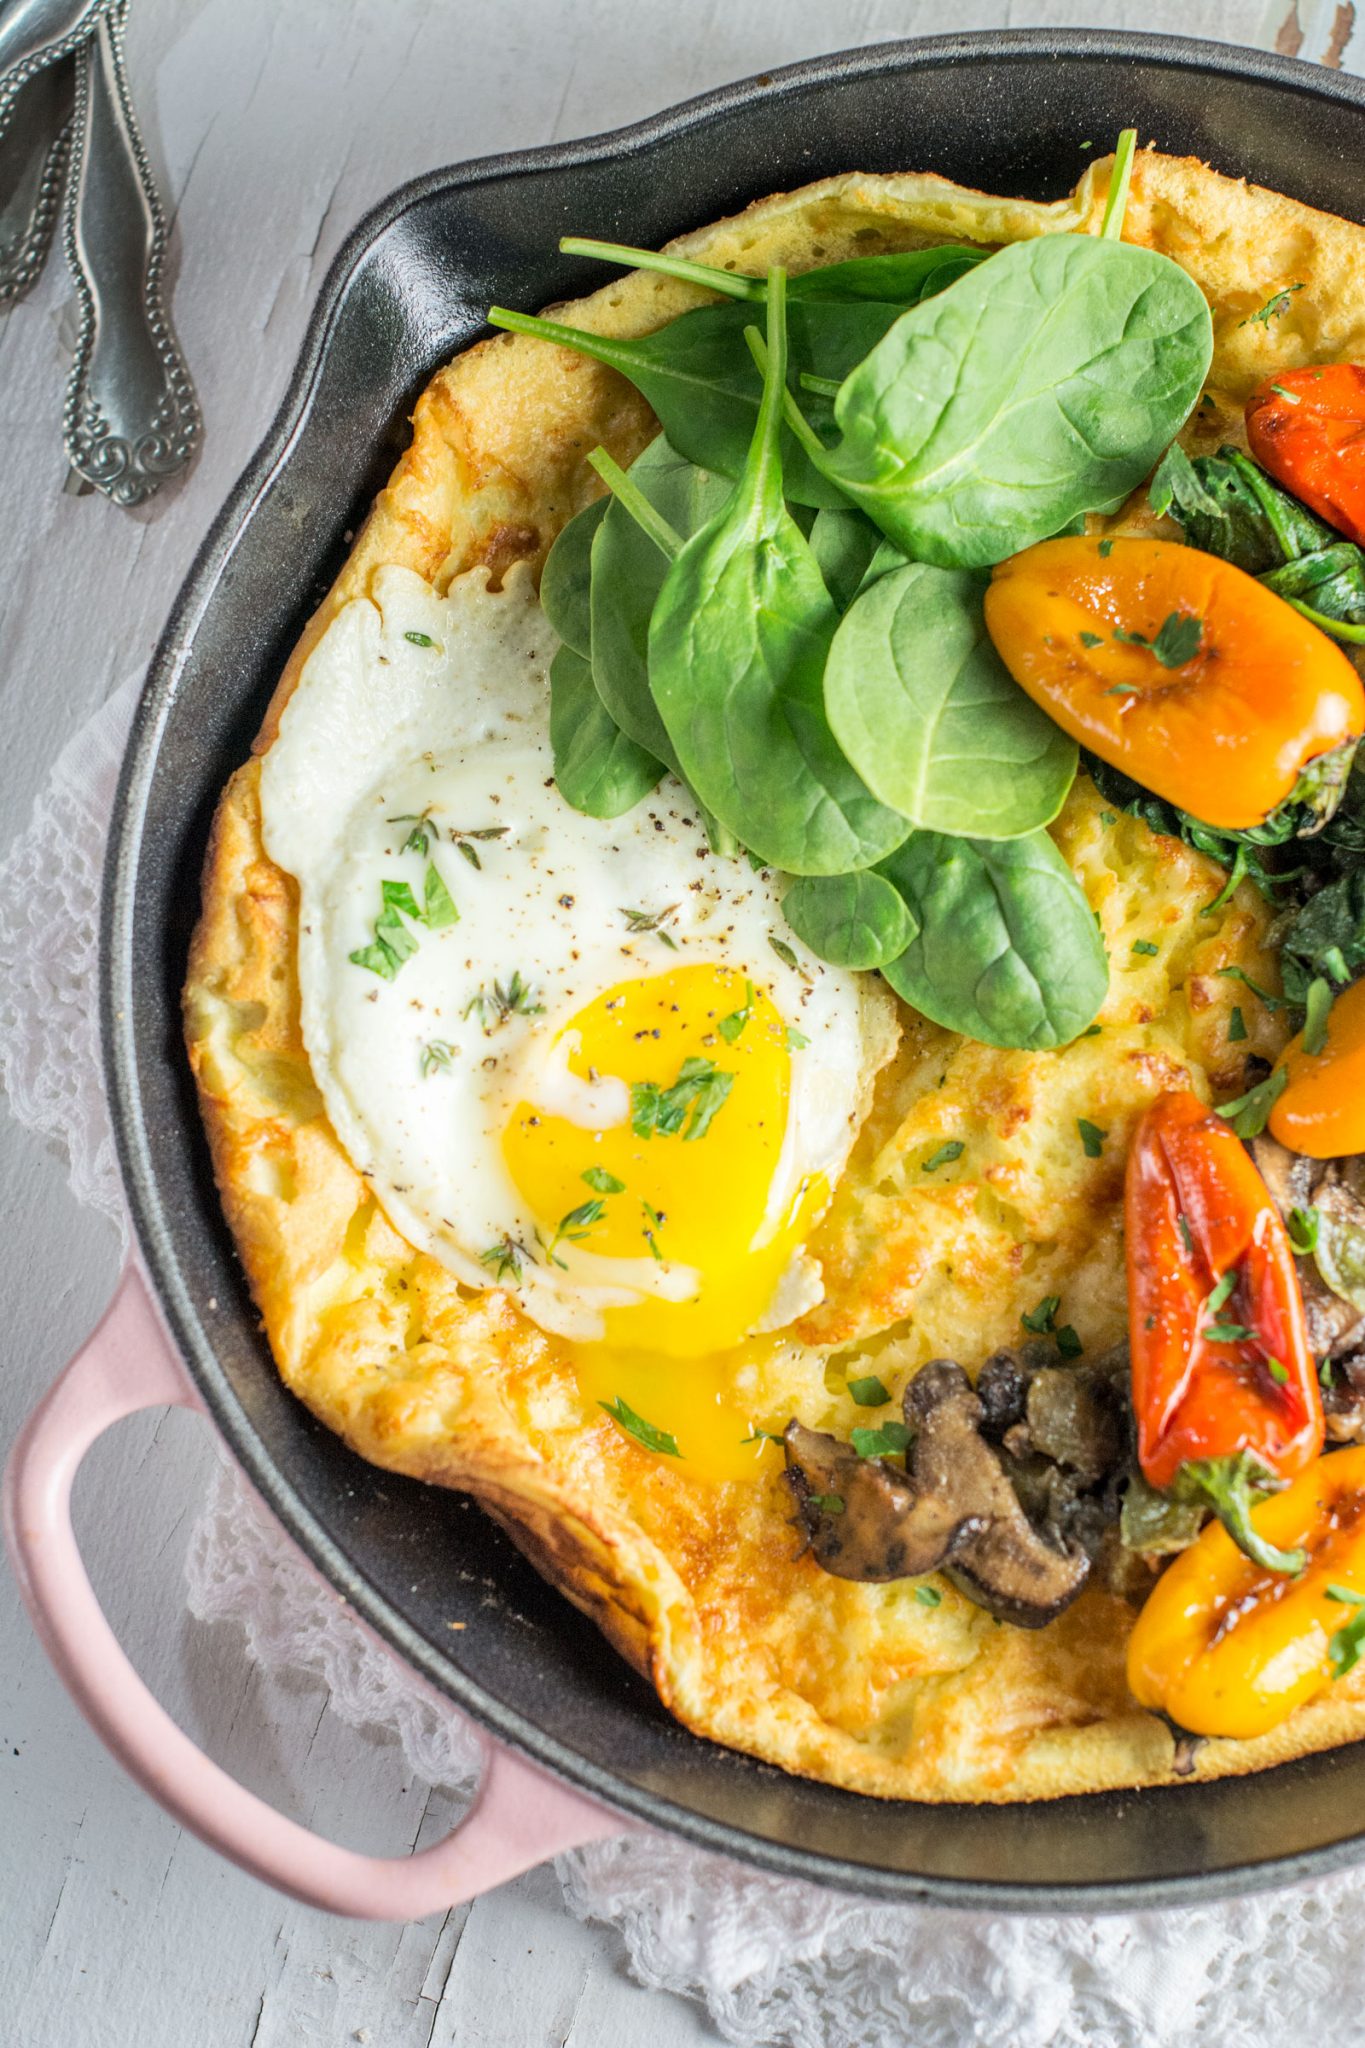 Savory Dutch Baby being served along with @enjoyPampelonne and made in my favorite skillet from @LeCreuset. Get the recipe at Little Figgy Food. #ad #LeCreusetLove #EnjoyPampelonne